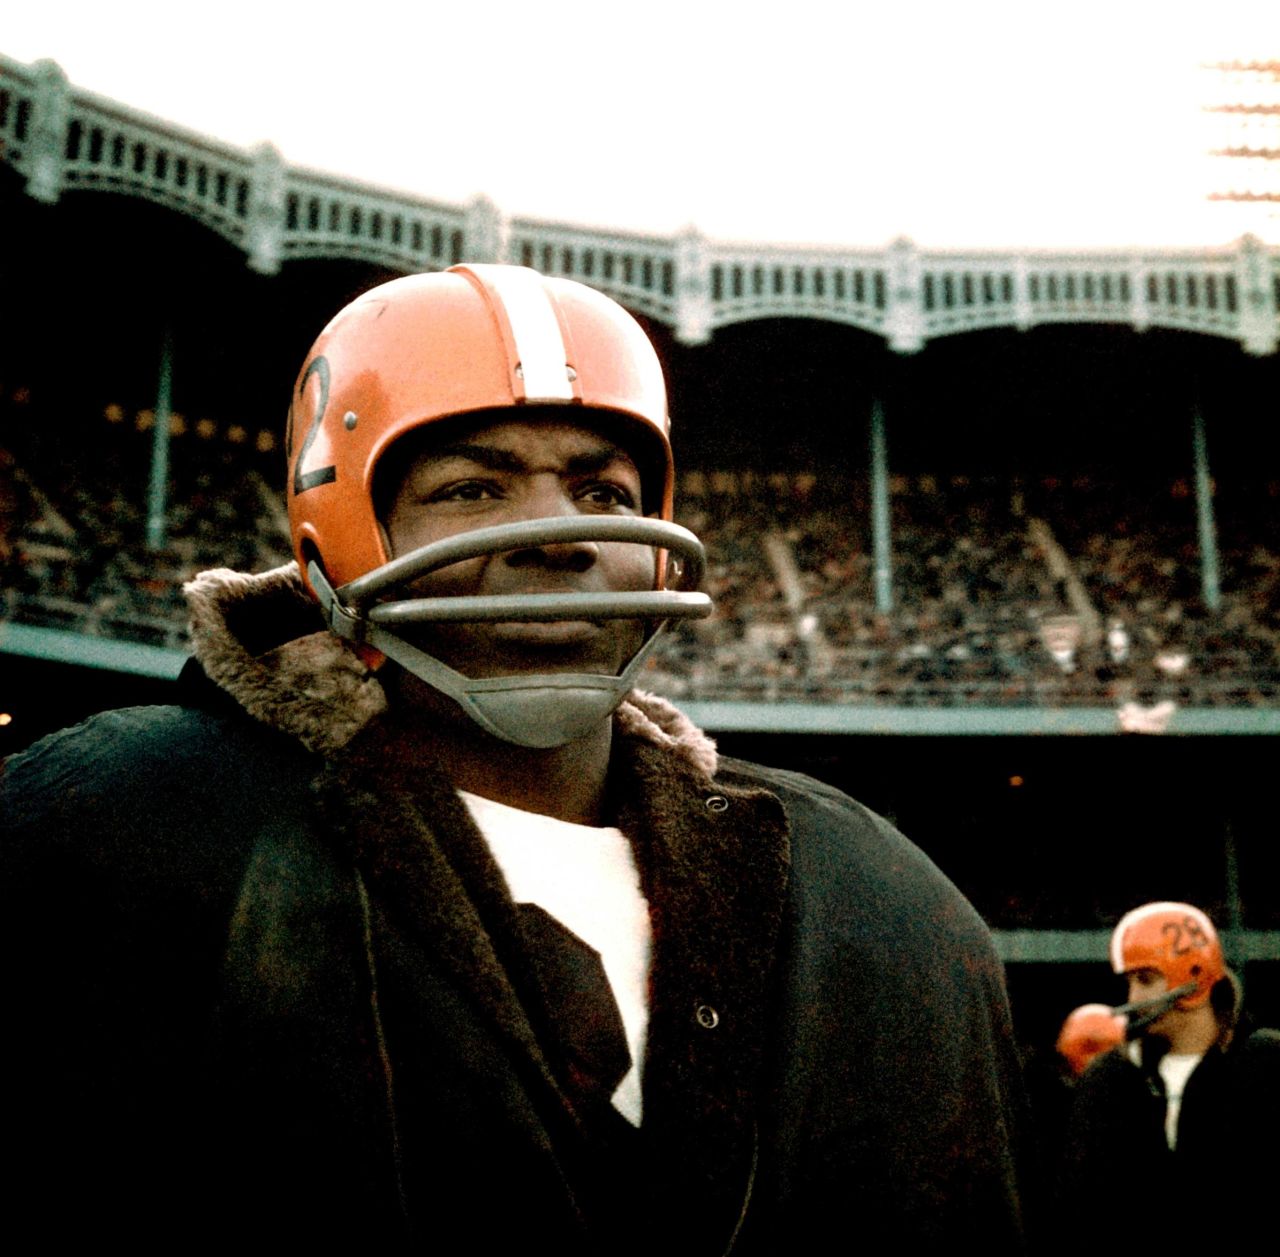 Brown is bundled up on the sidelines during an NFL game against the New York Giants in December 1964.